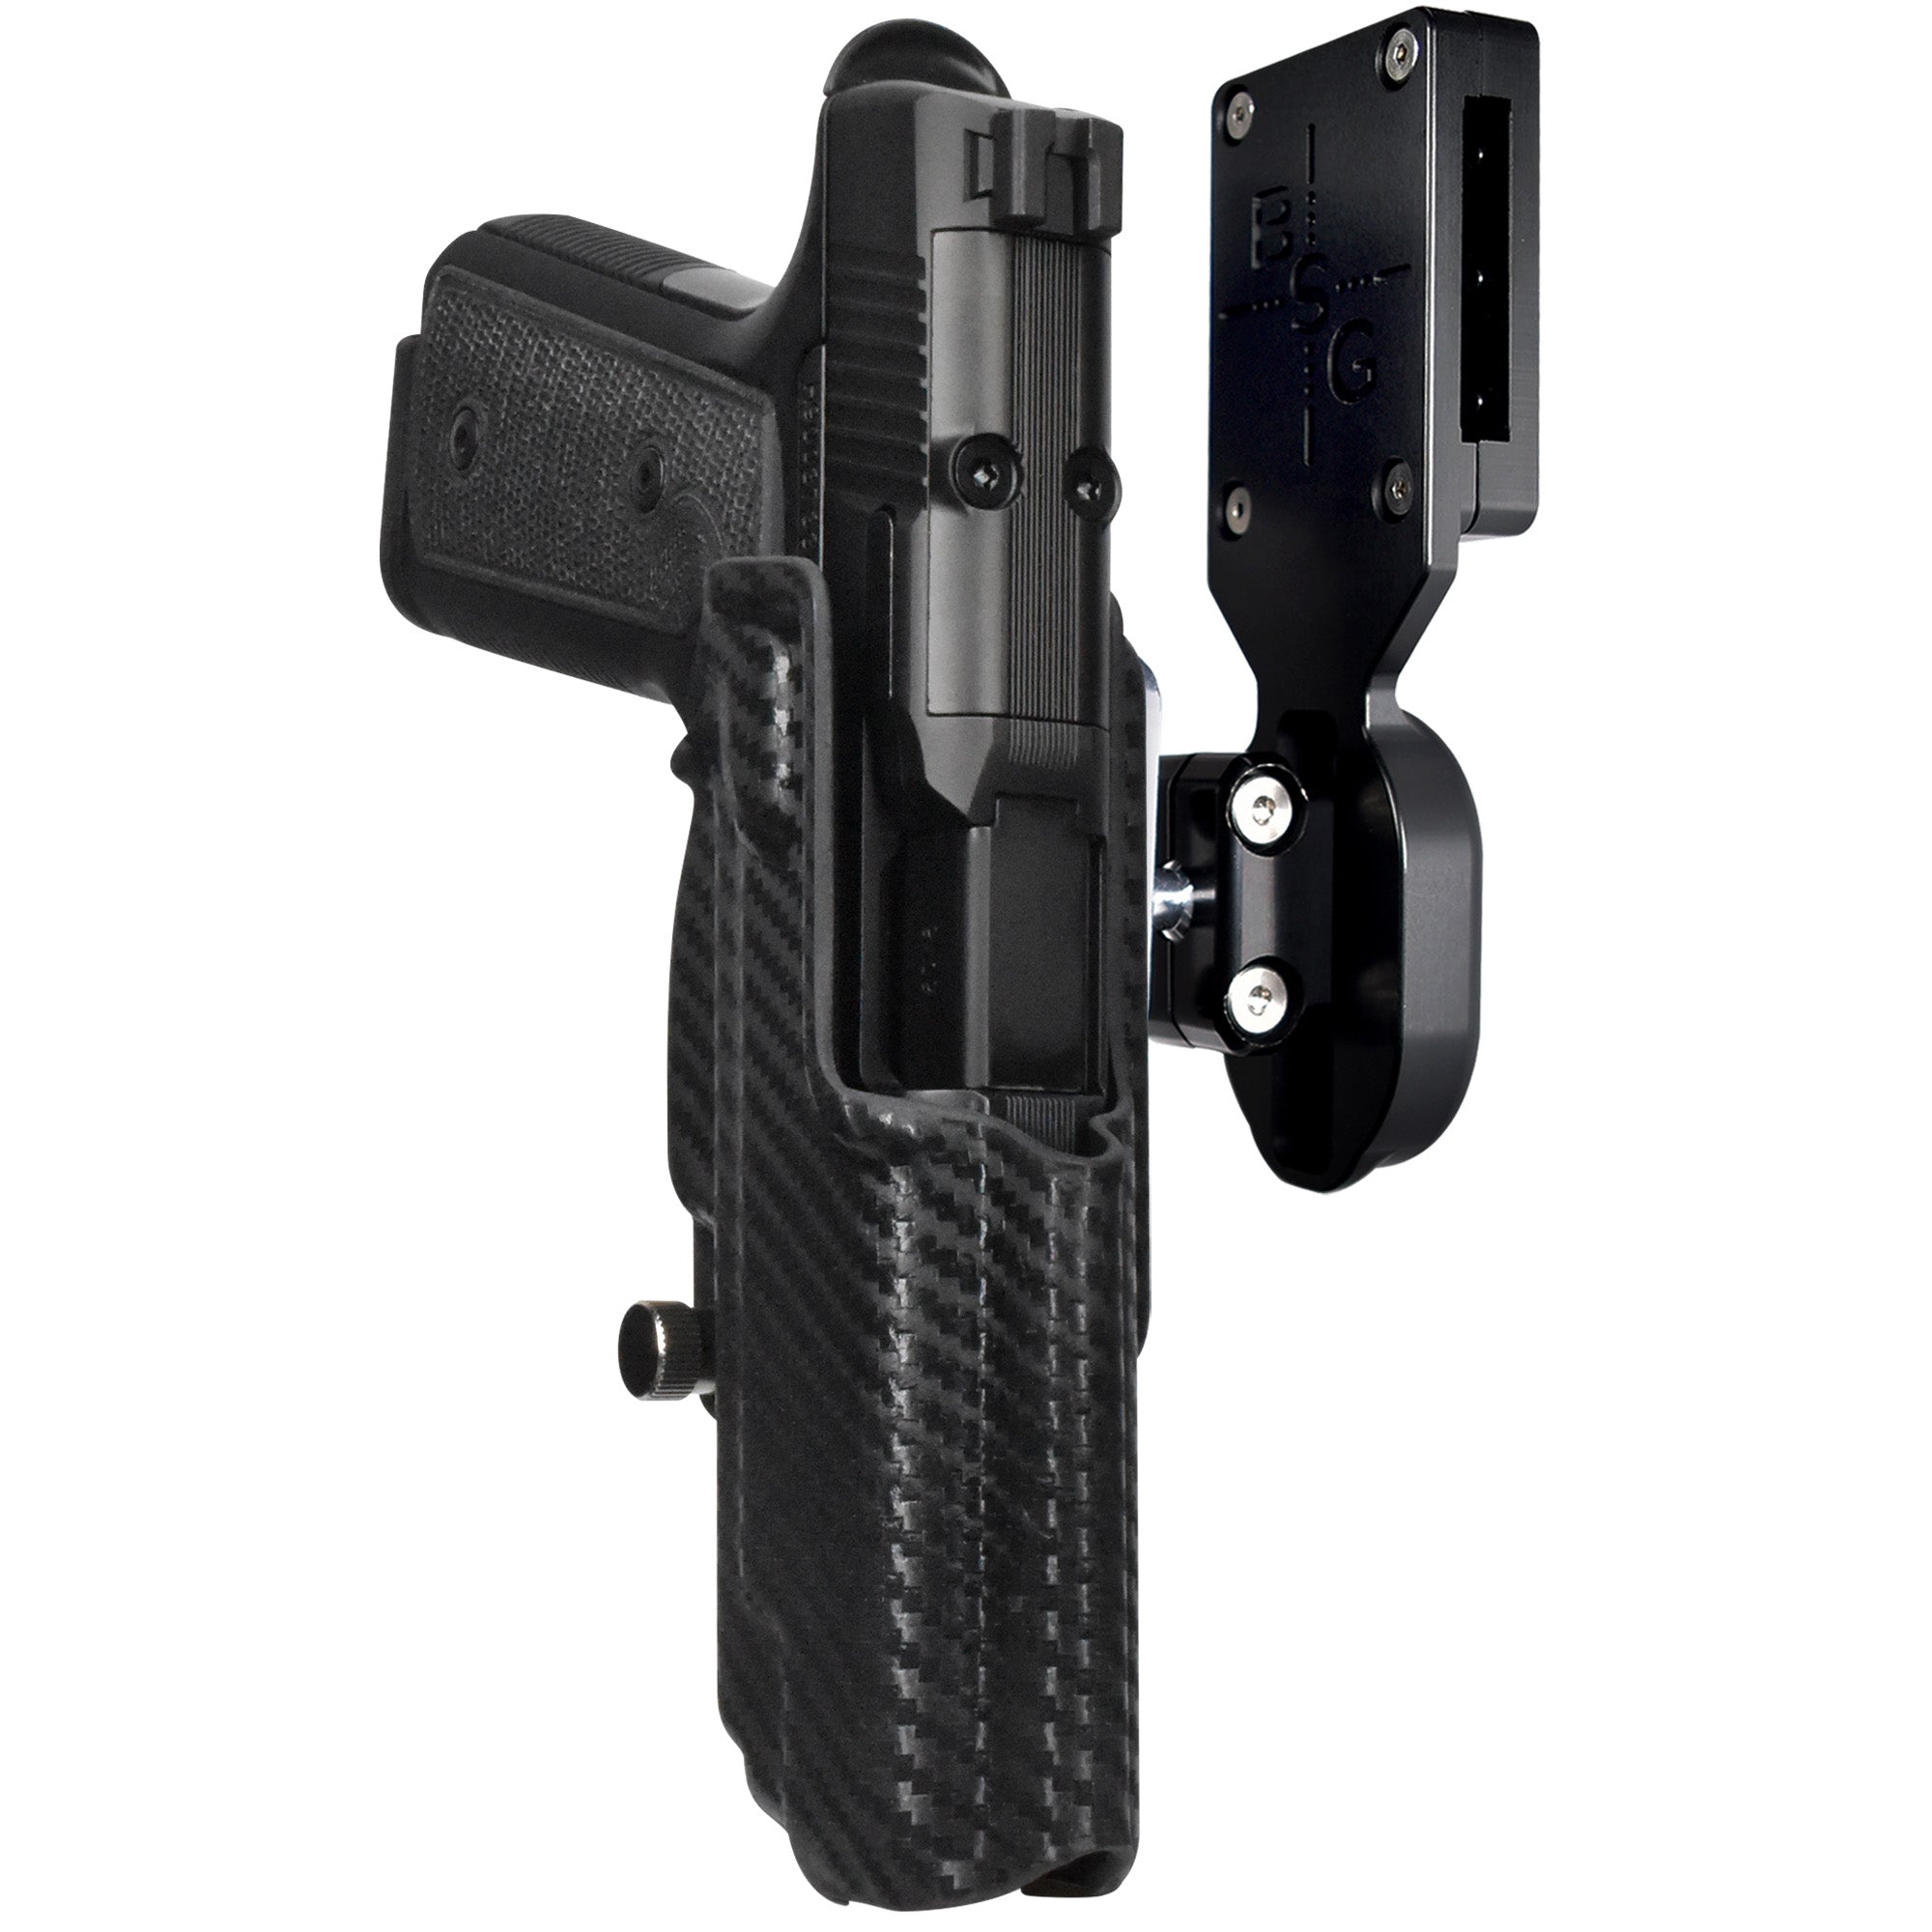 Daniel Defense H9 Pro Ball Joint Competition Holster in Carbon Fiber